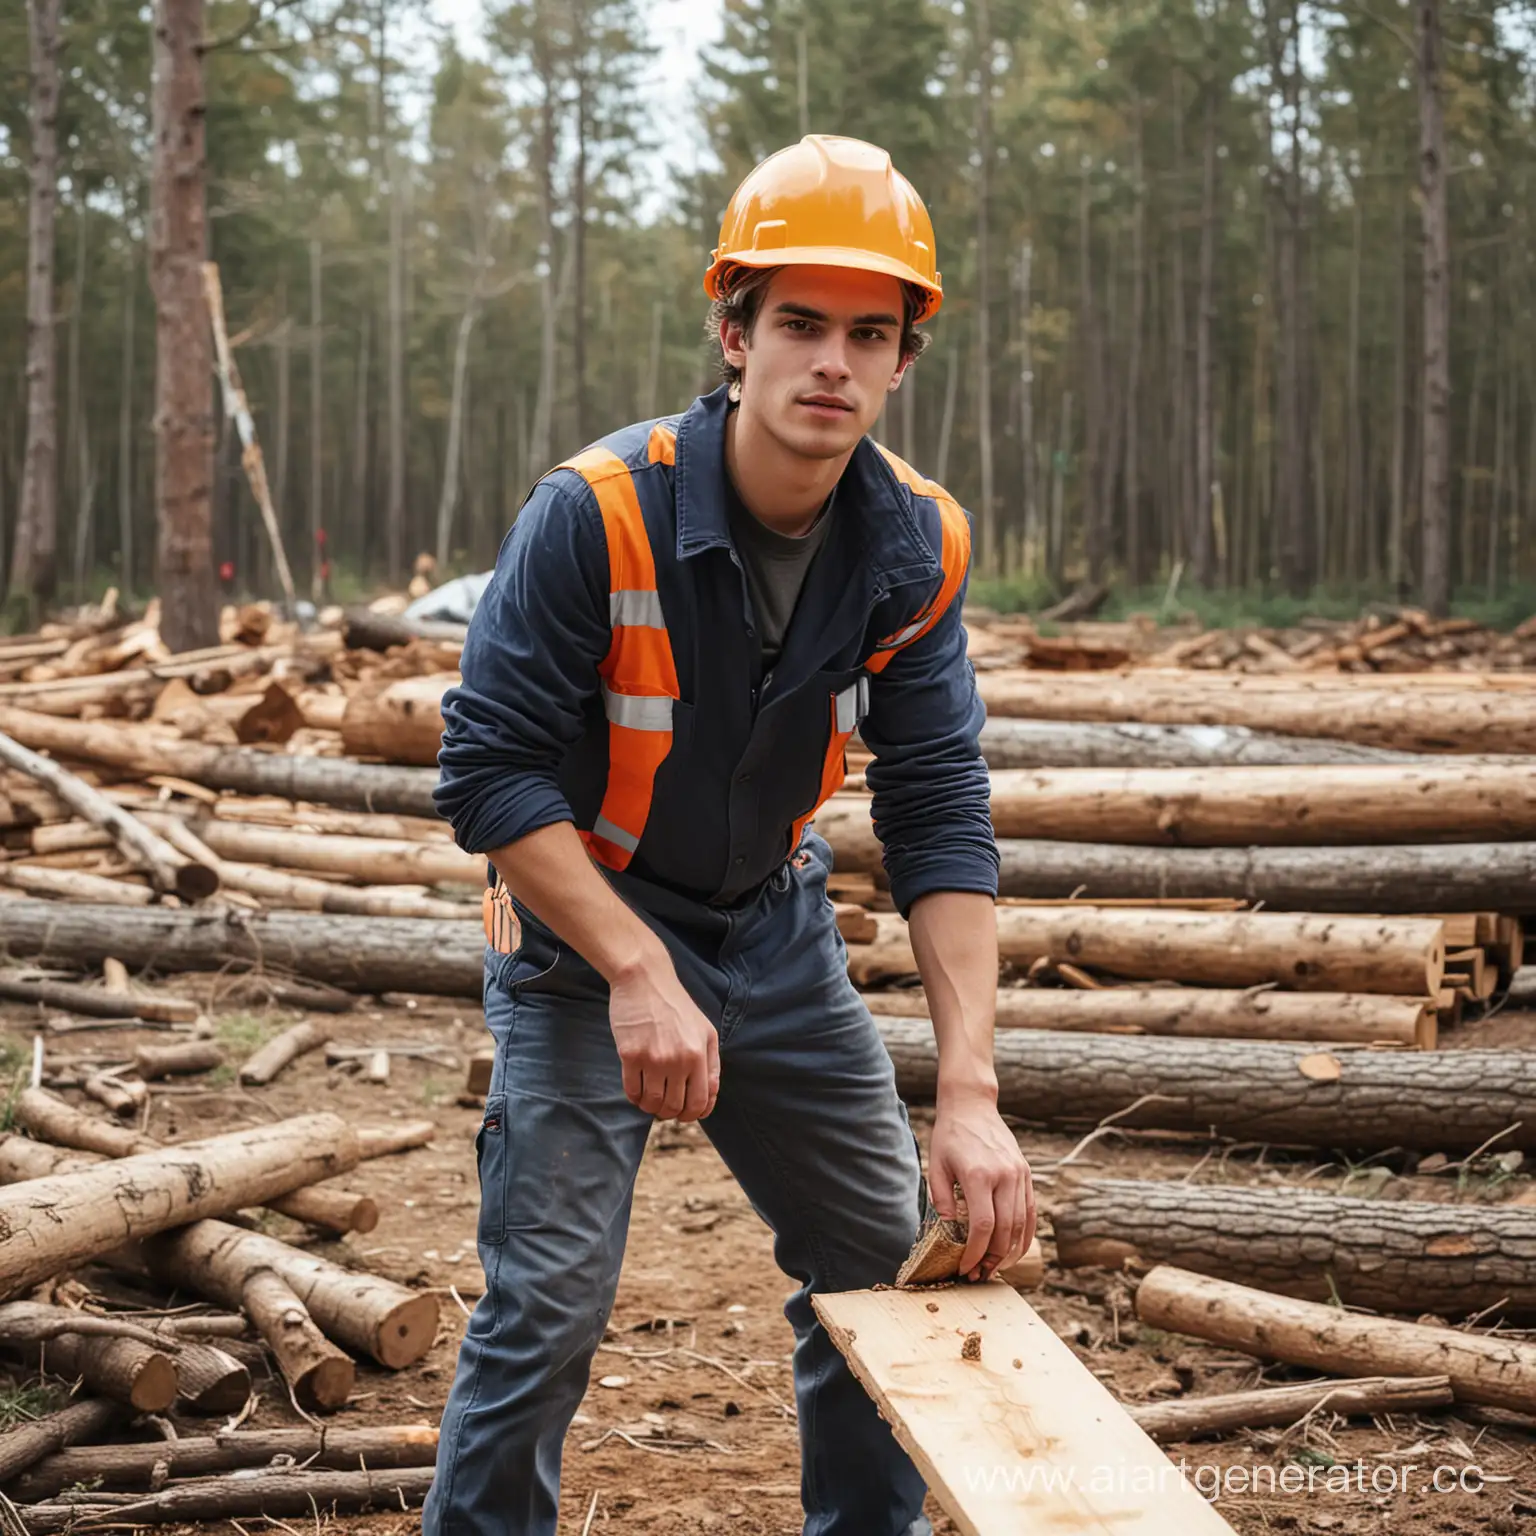 Young-Male-Woodworker-with-Tools-Amidst-Lumber-and-Nature